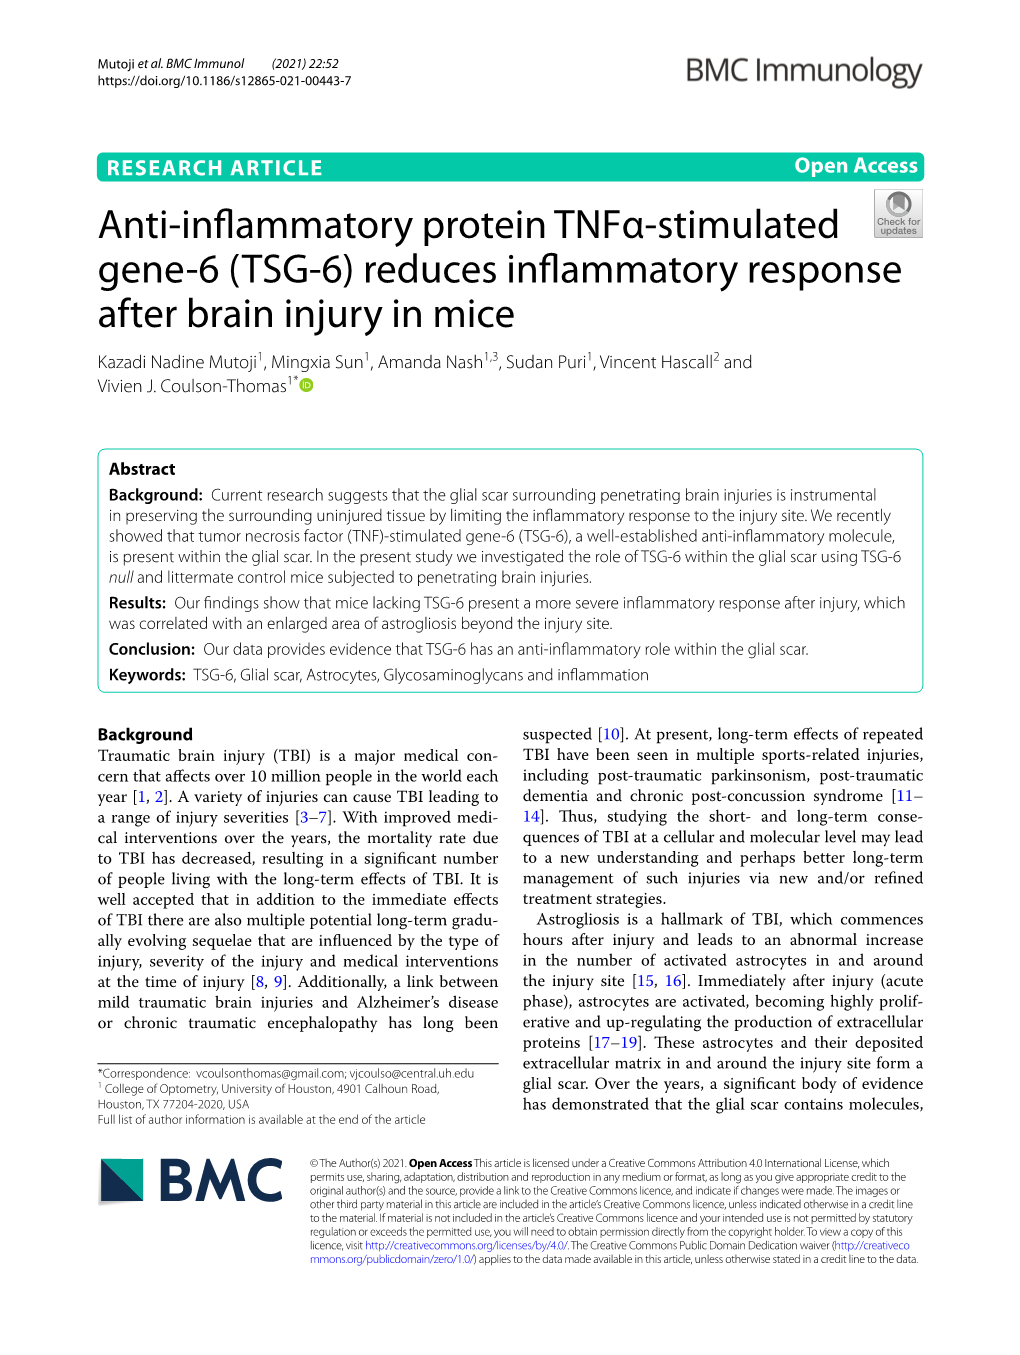 (TSG-6) Reduces Inflammatory Response After Brain Injury in Mice